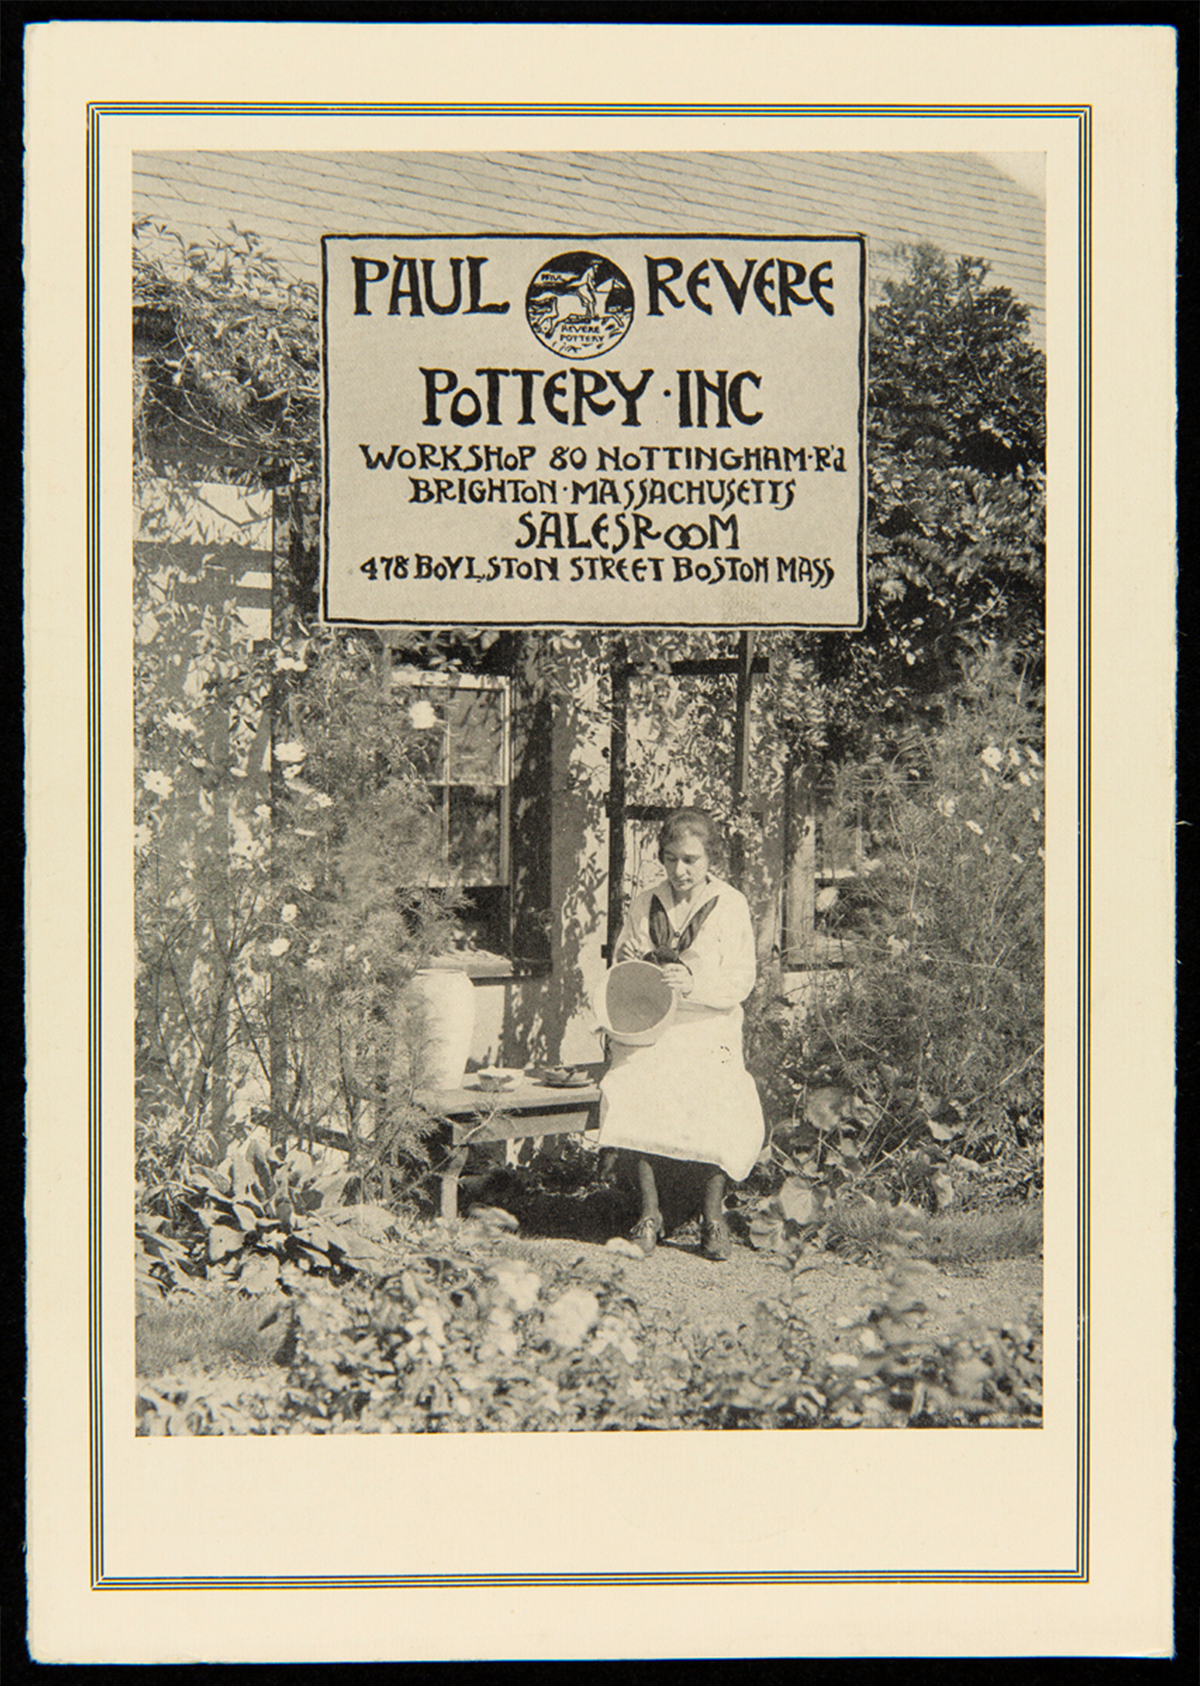 Catalog for the Paul Revere Pottery, about 1930